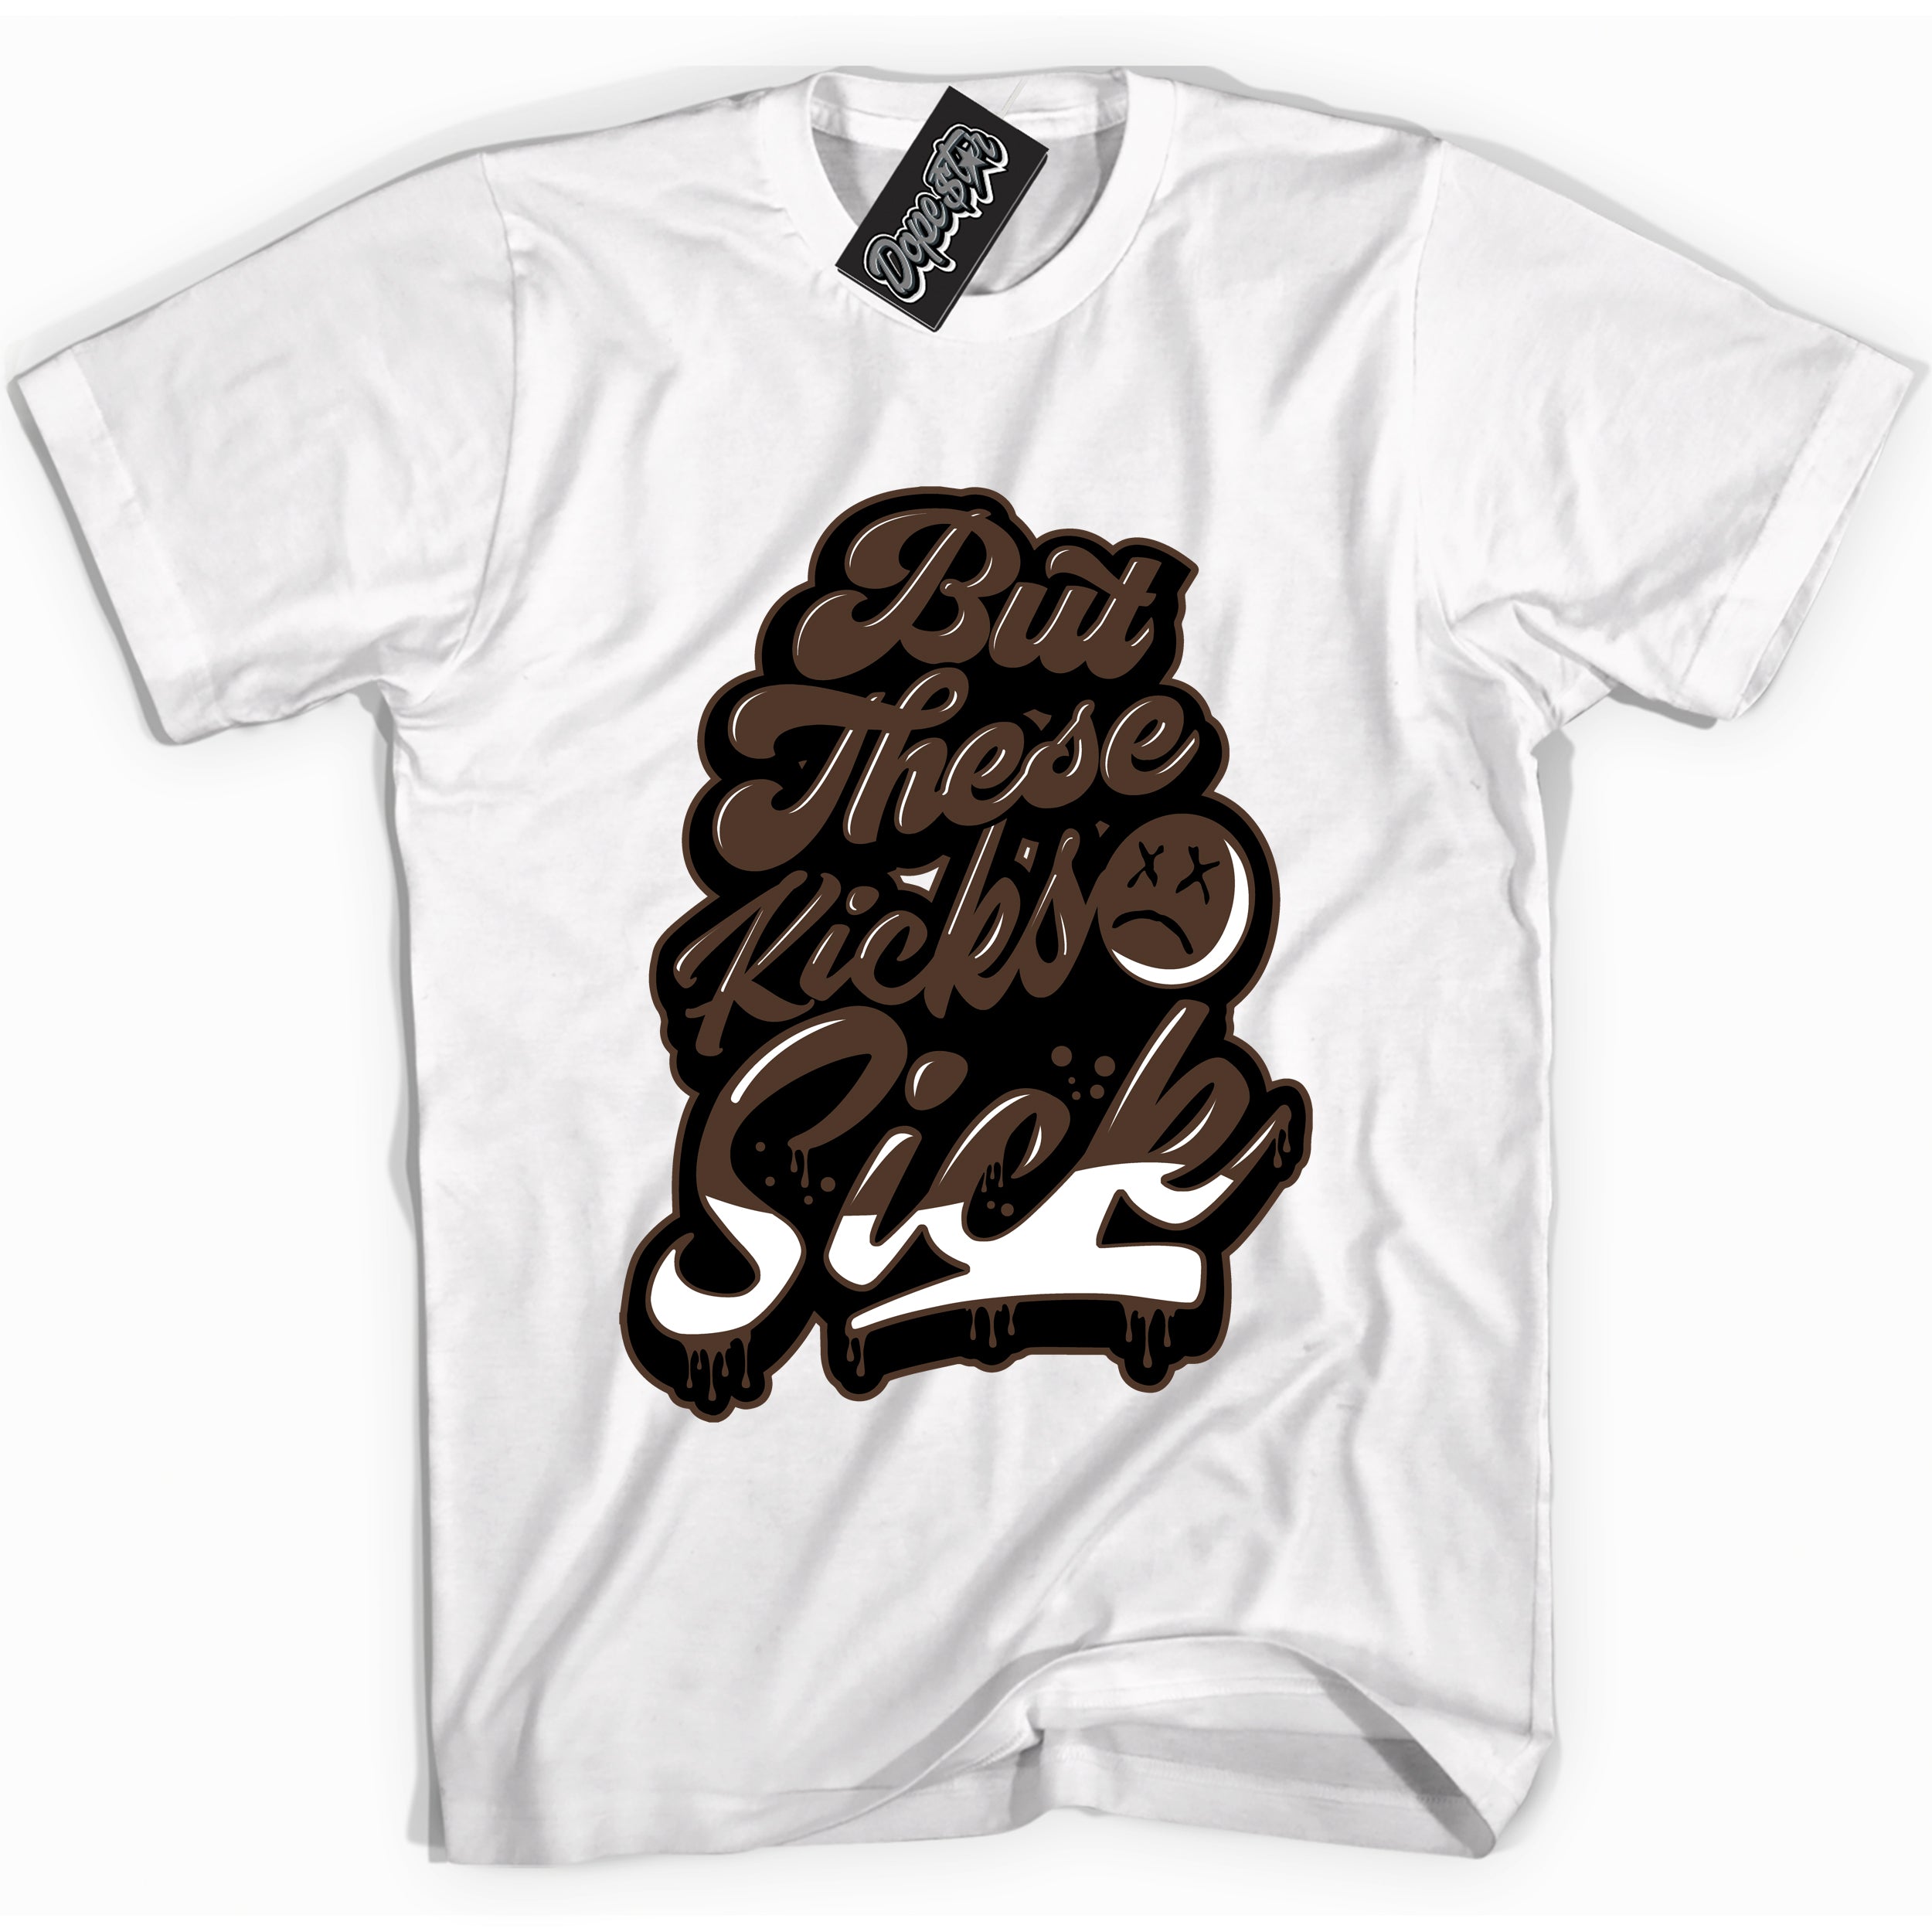 Cool White graphic tee with “ Kick Sick ” design, that perfectly matches Palomino 1s sneakers 